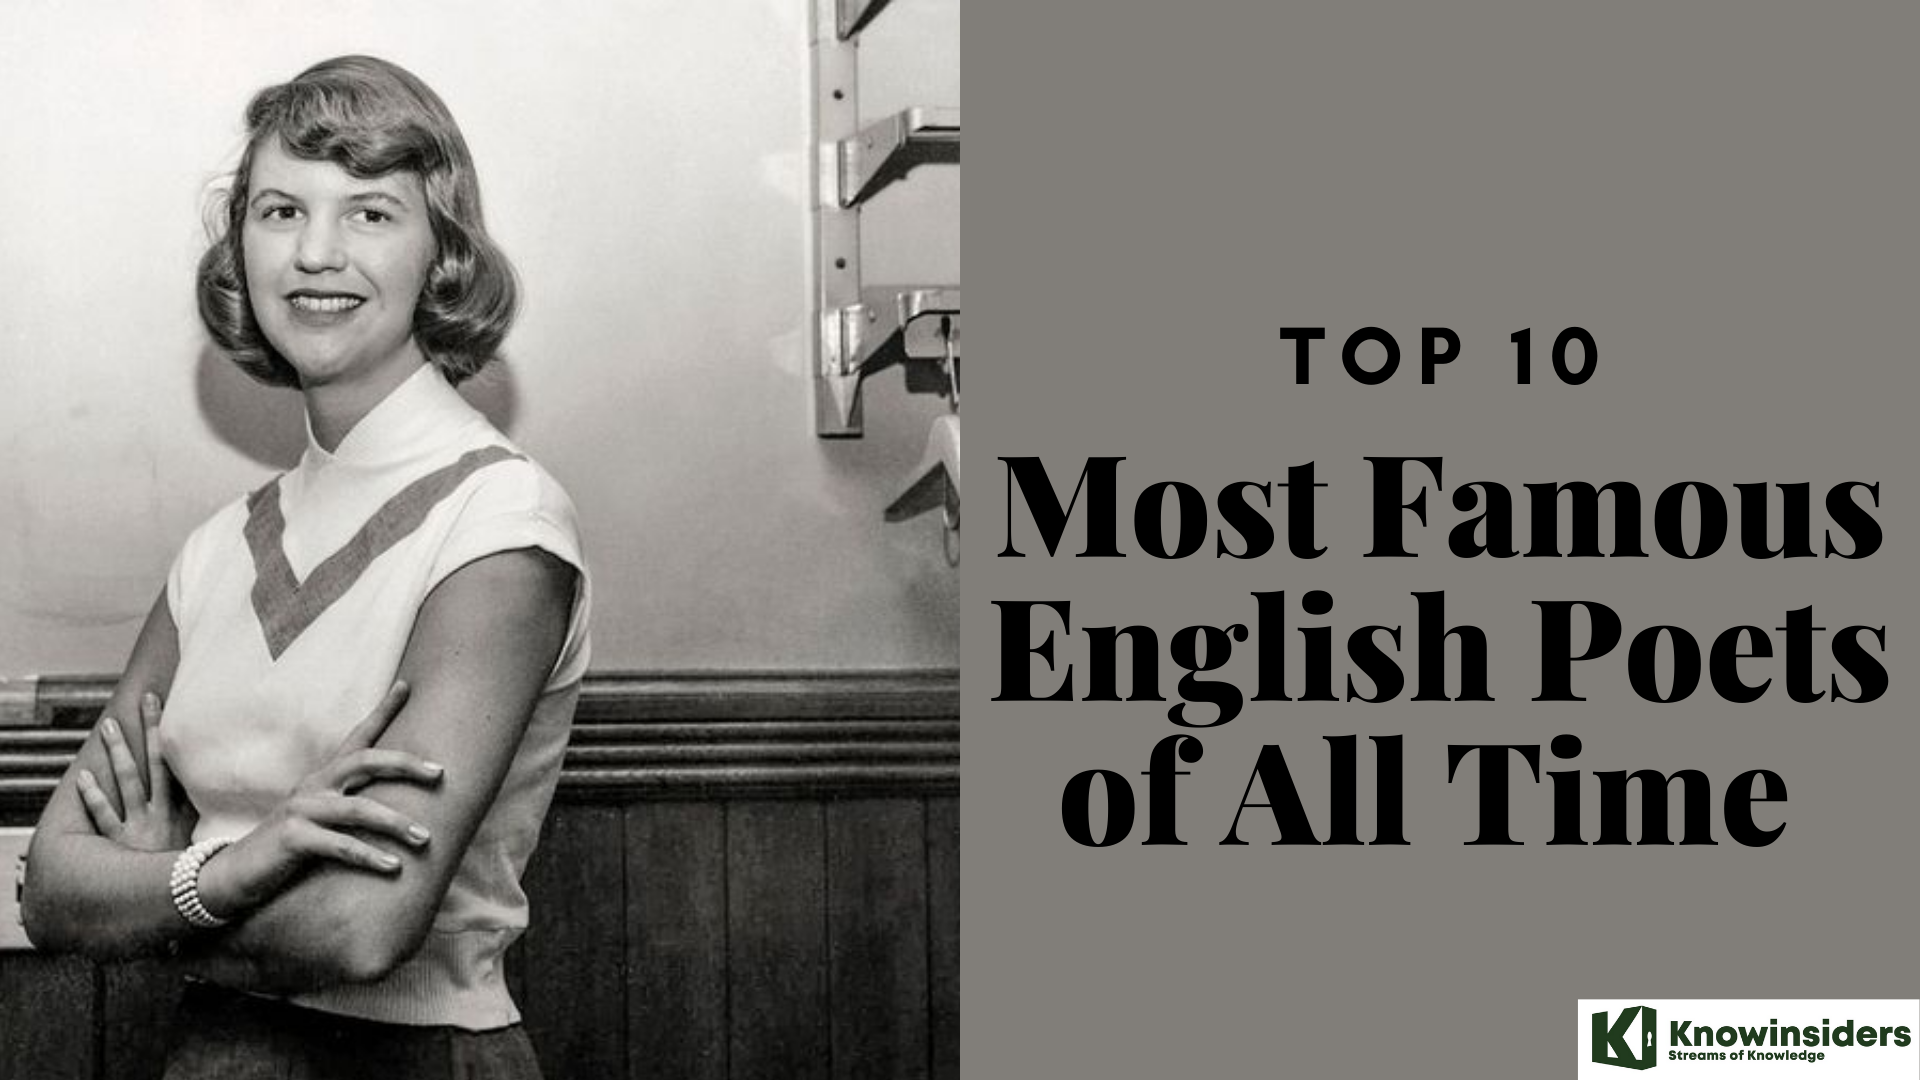 The Top 10 Most Famous English Poets of All Time